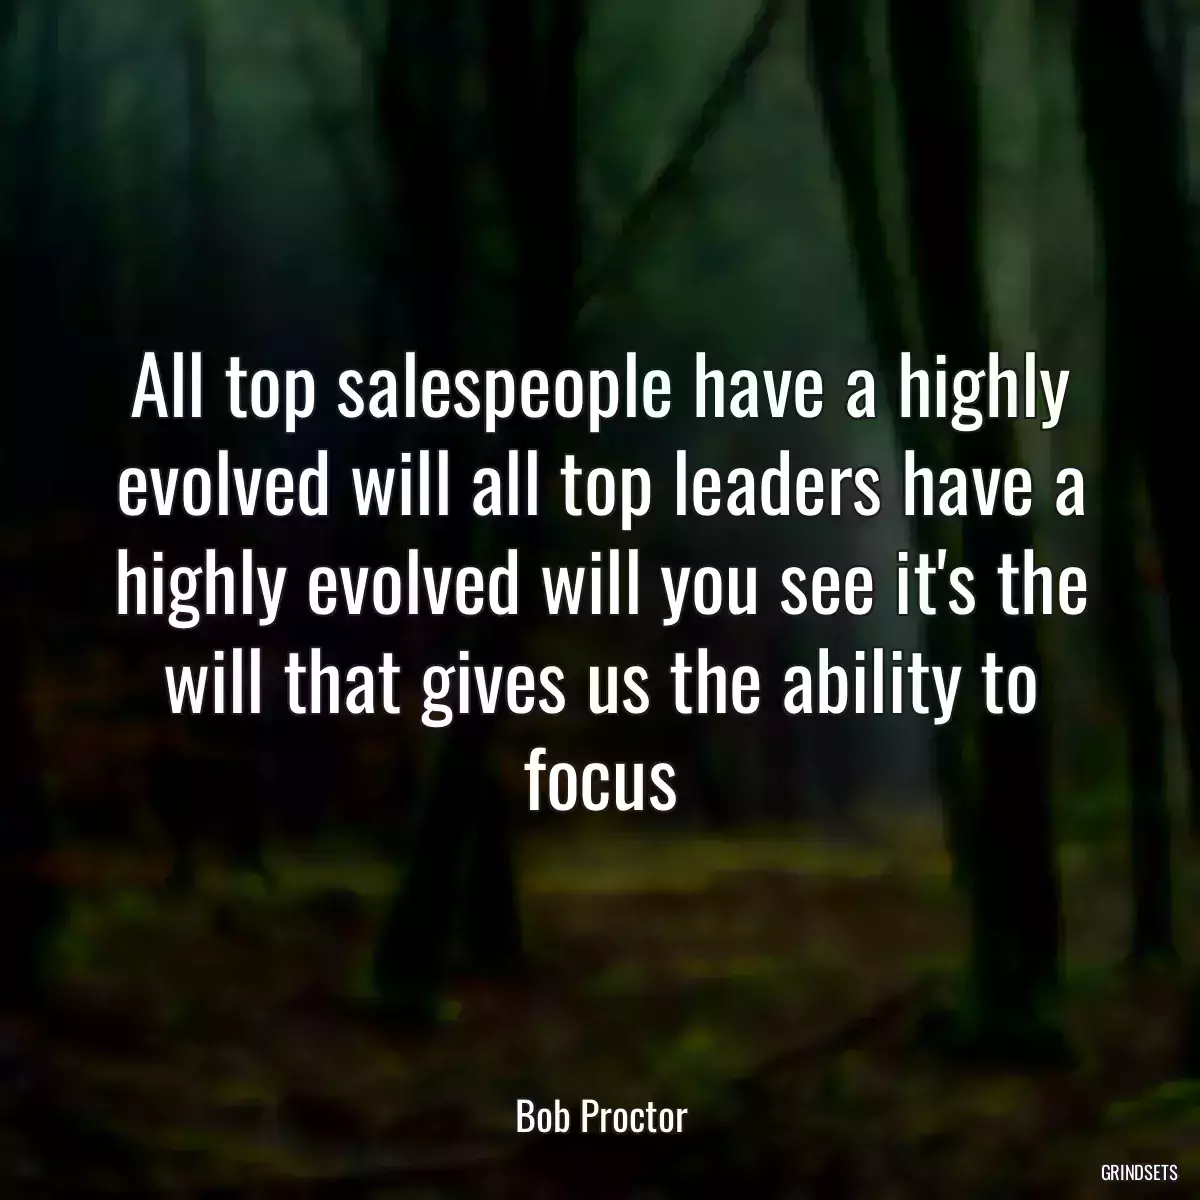 All top salespeople have a highly evolved will all top leaders have a highly evolved will you see it\'s the will that gives us the ability to focus